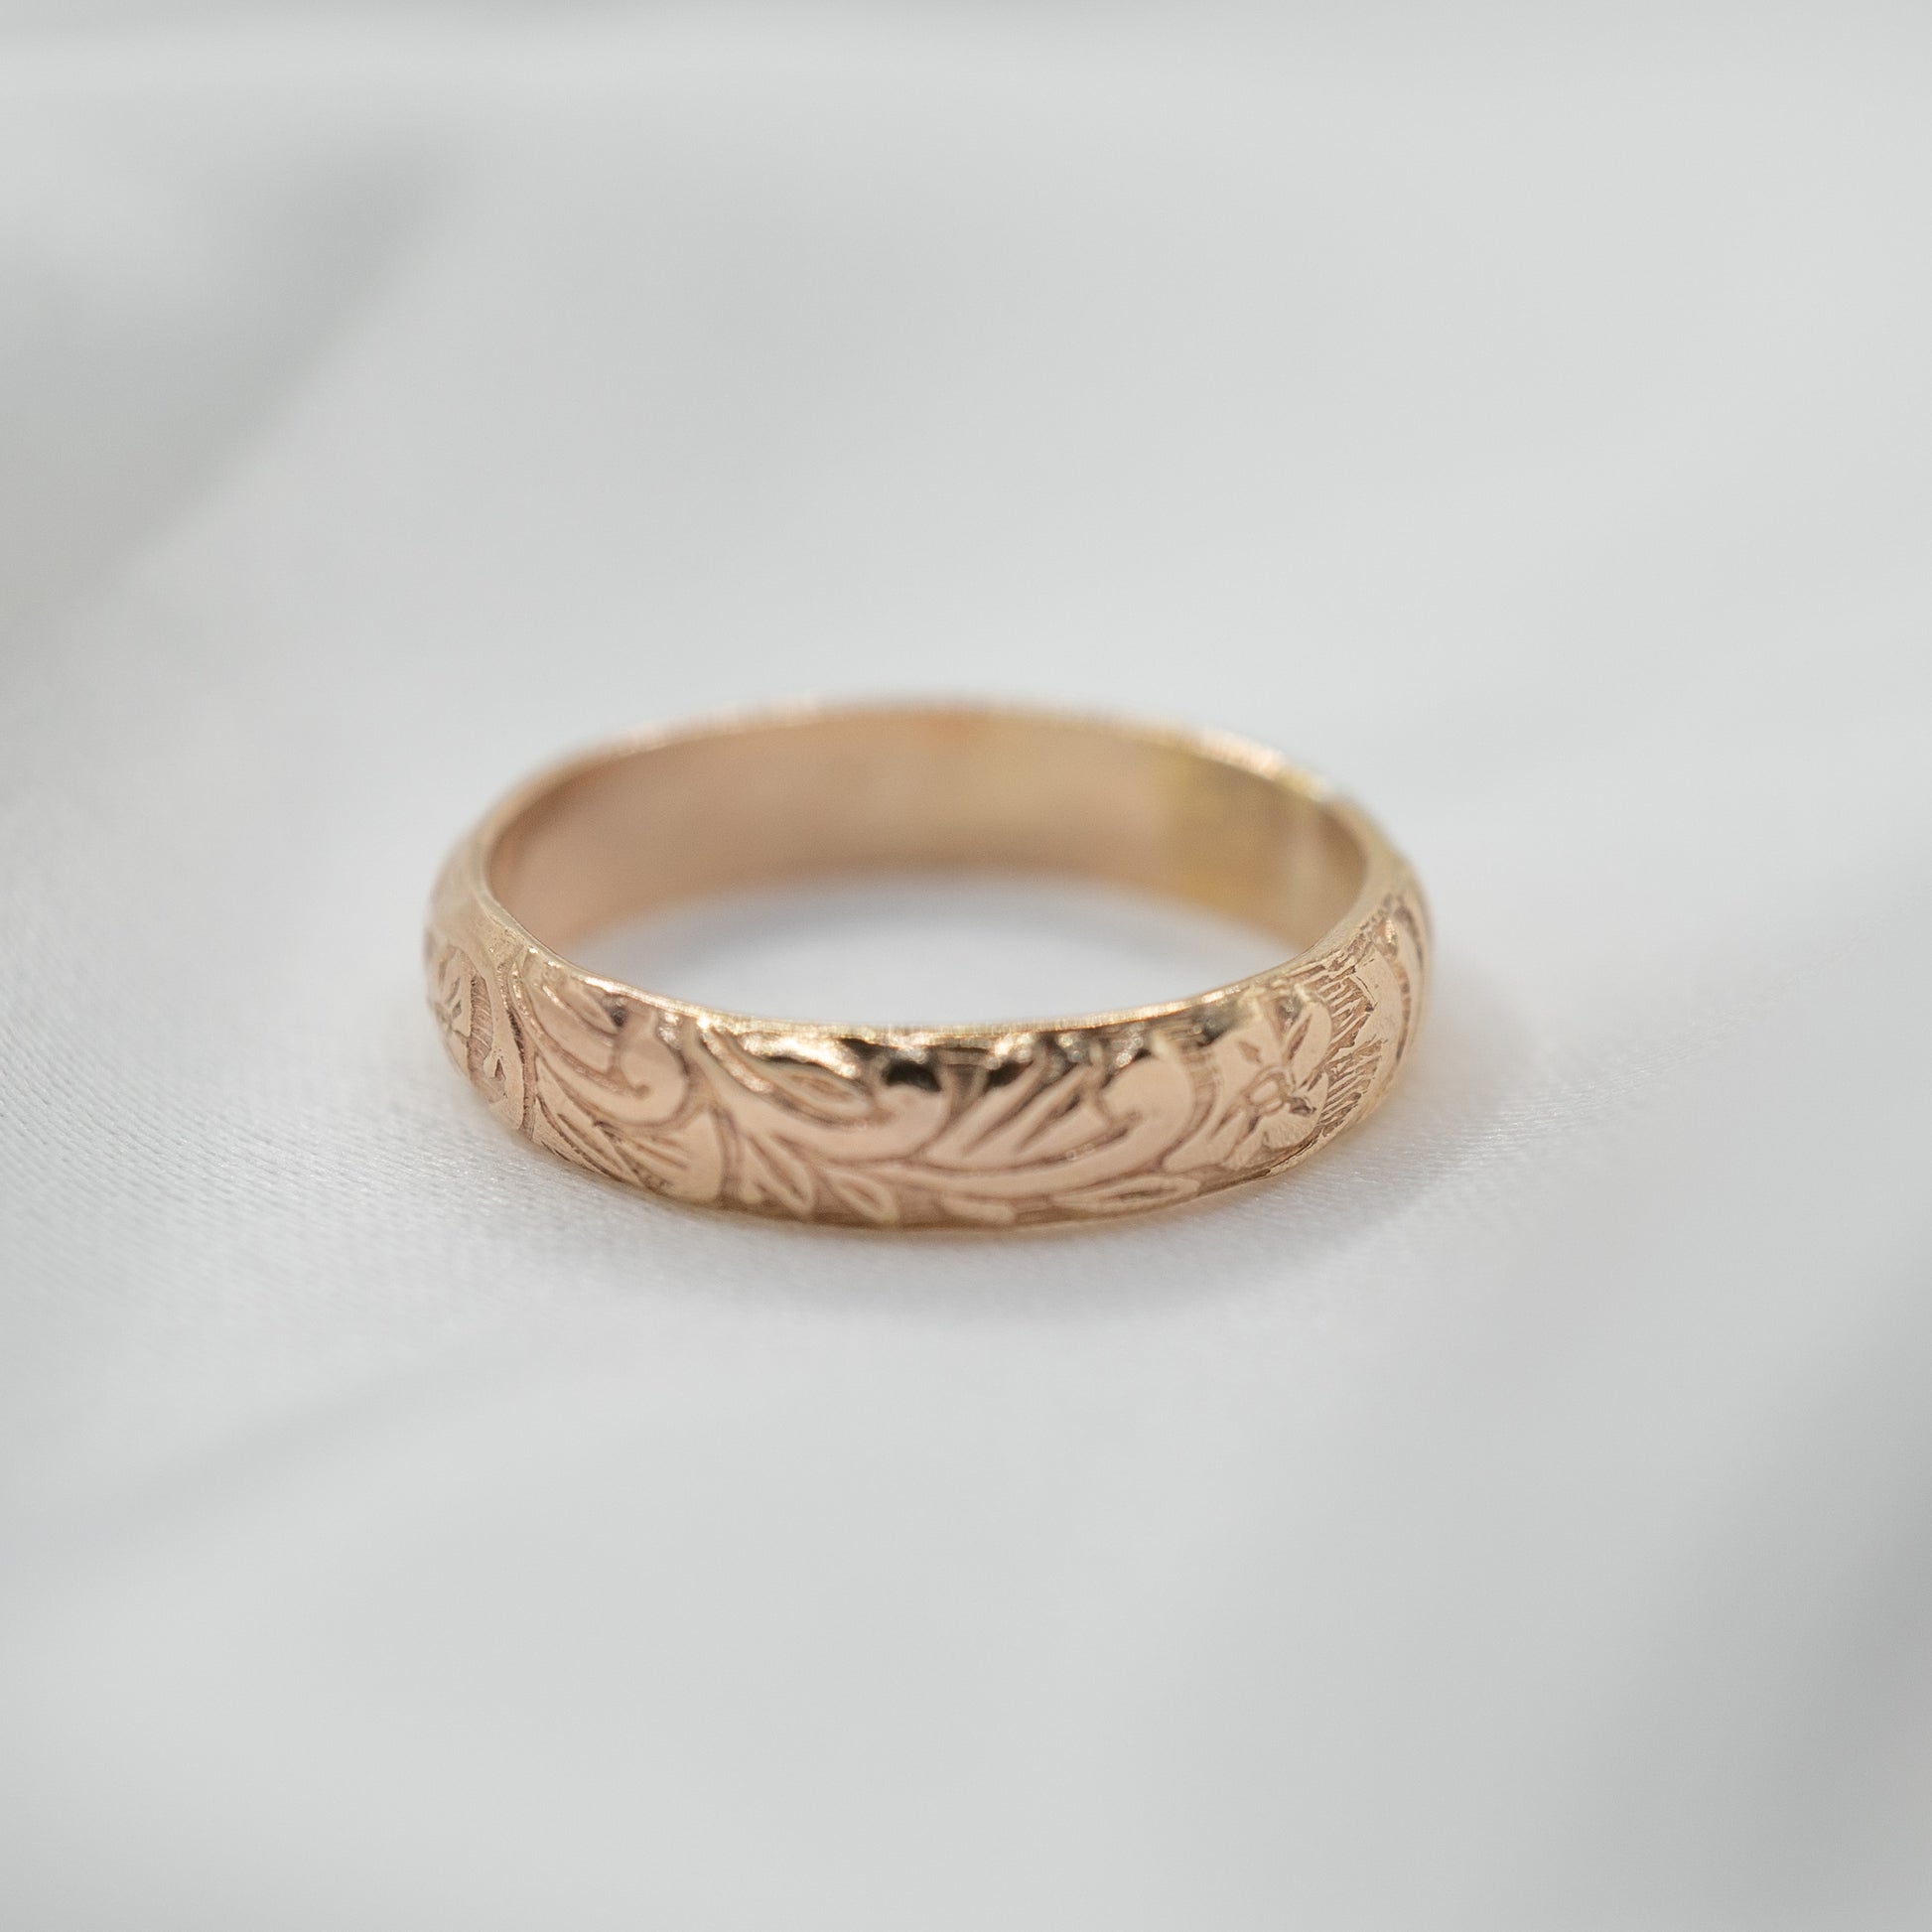 Gold Filled Vintage Pattern Ring - shot on white - front view close up